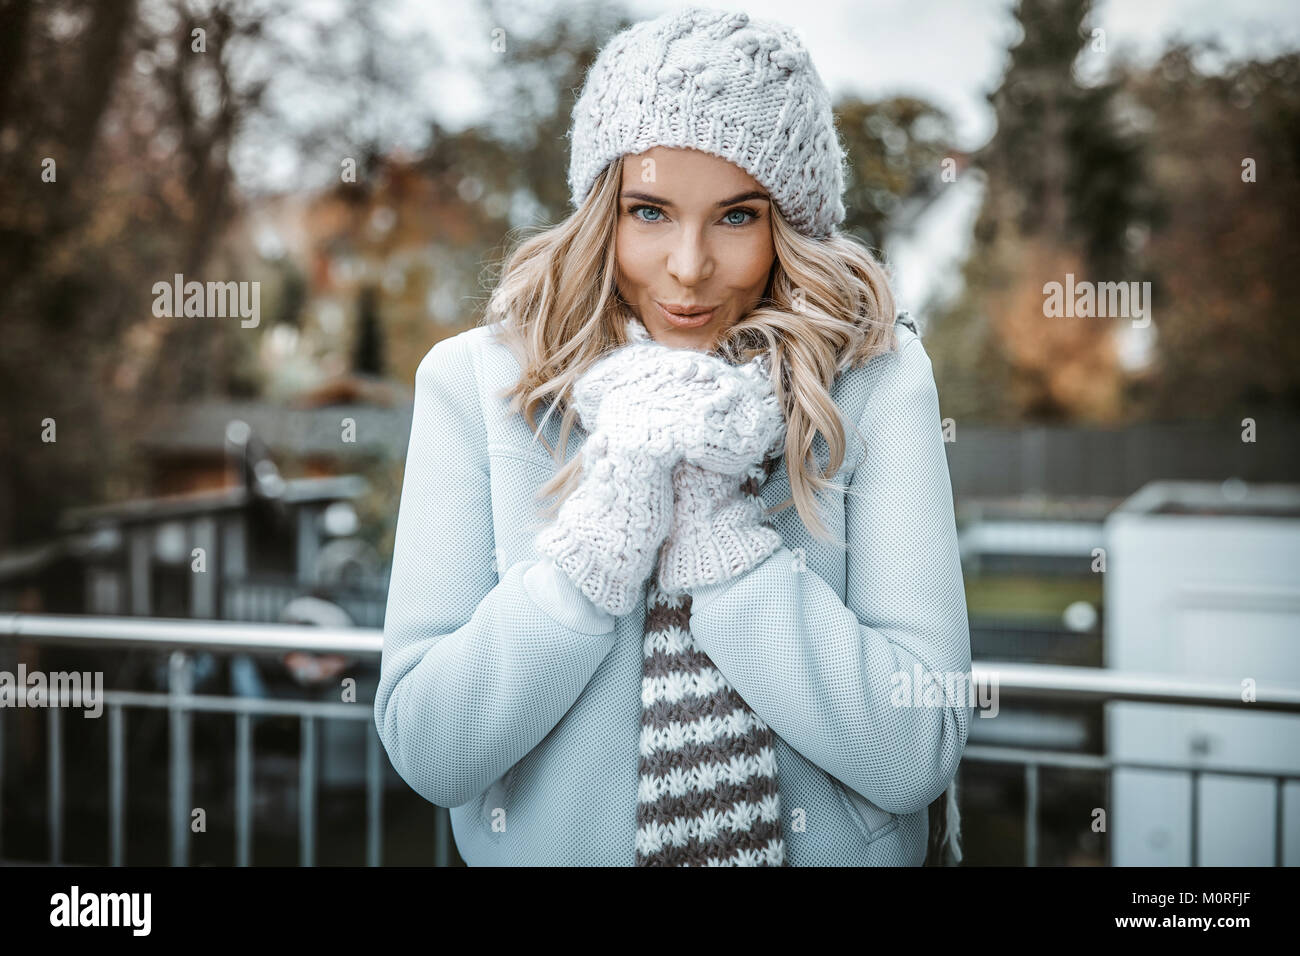 Portrait of smiling woman wearing woolly hat, gloves and scarf Stock Photo